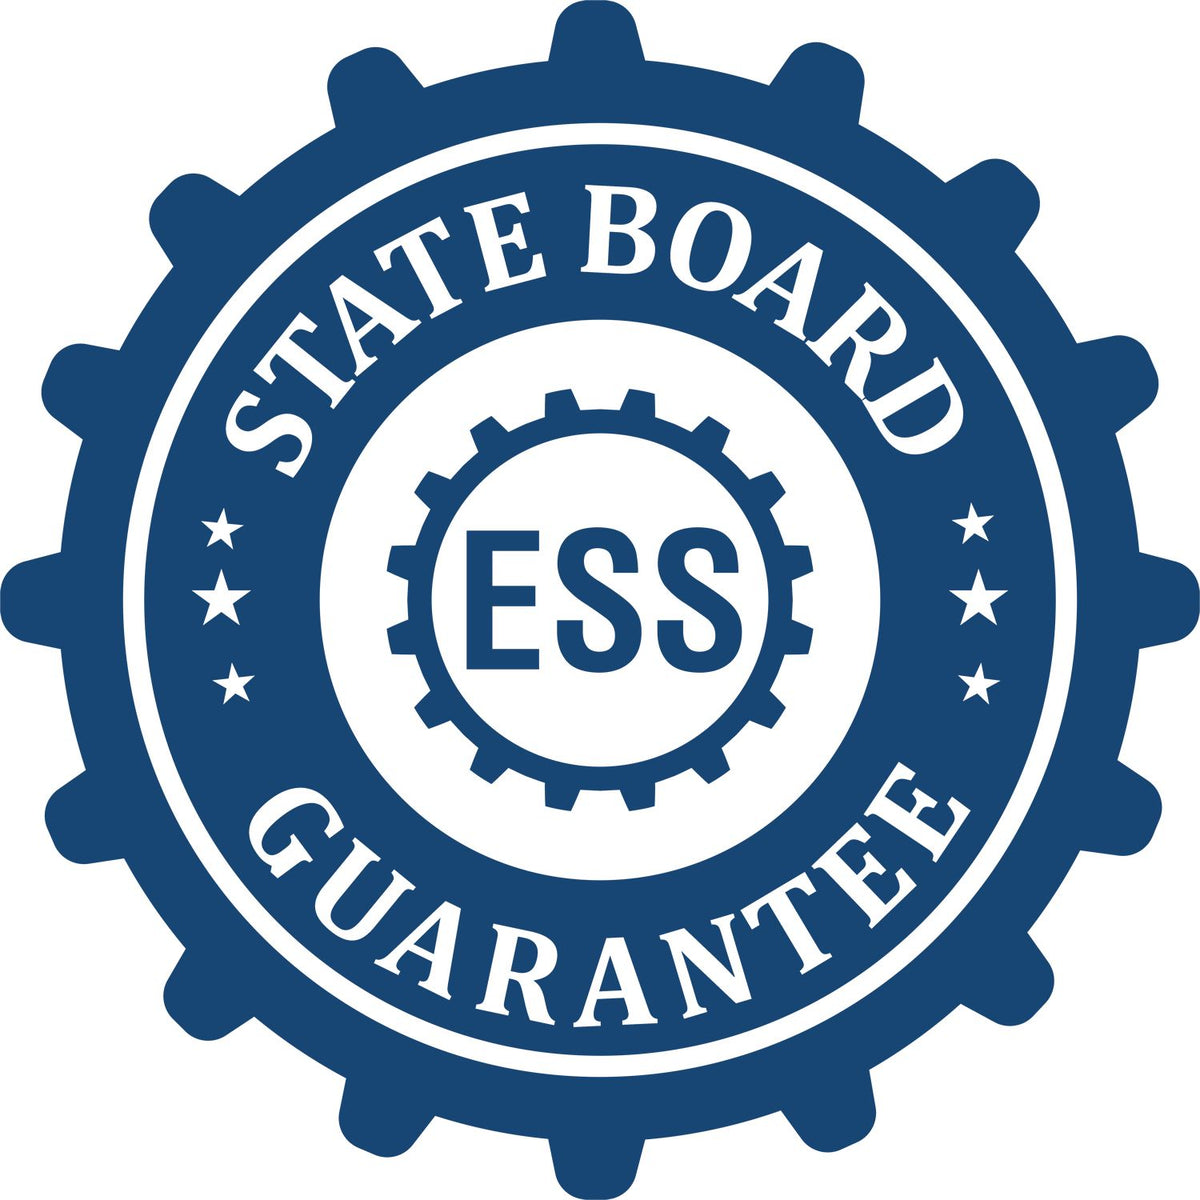 An emblem in a gear shape illustrating a state board guarantee for the State of Illinois Extended Long Reach Engineer Seal product.